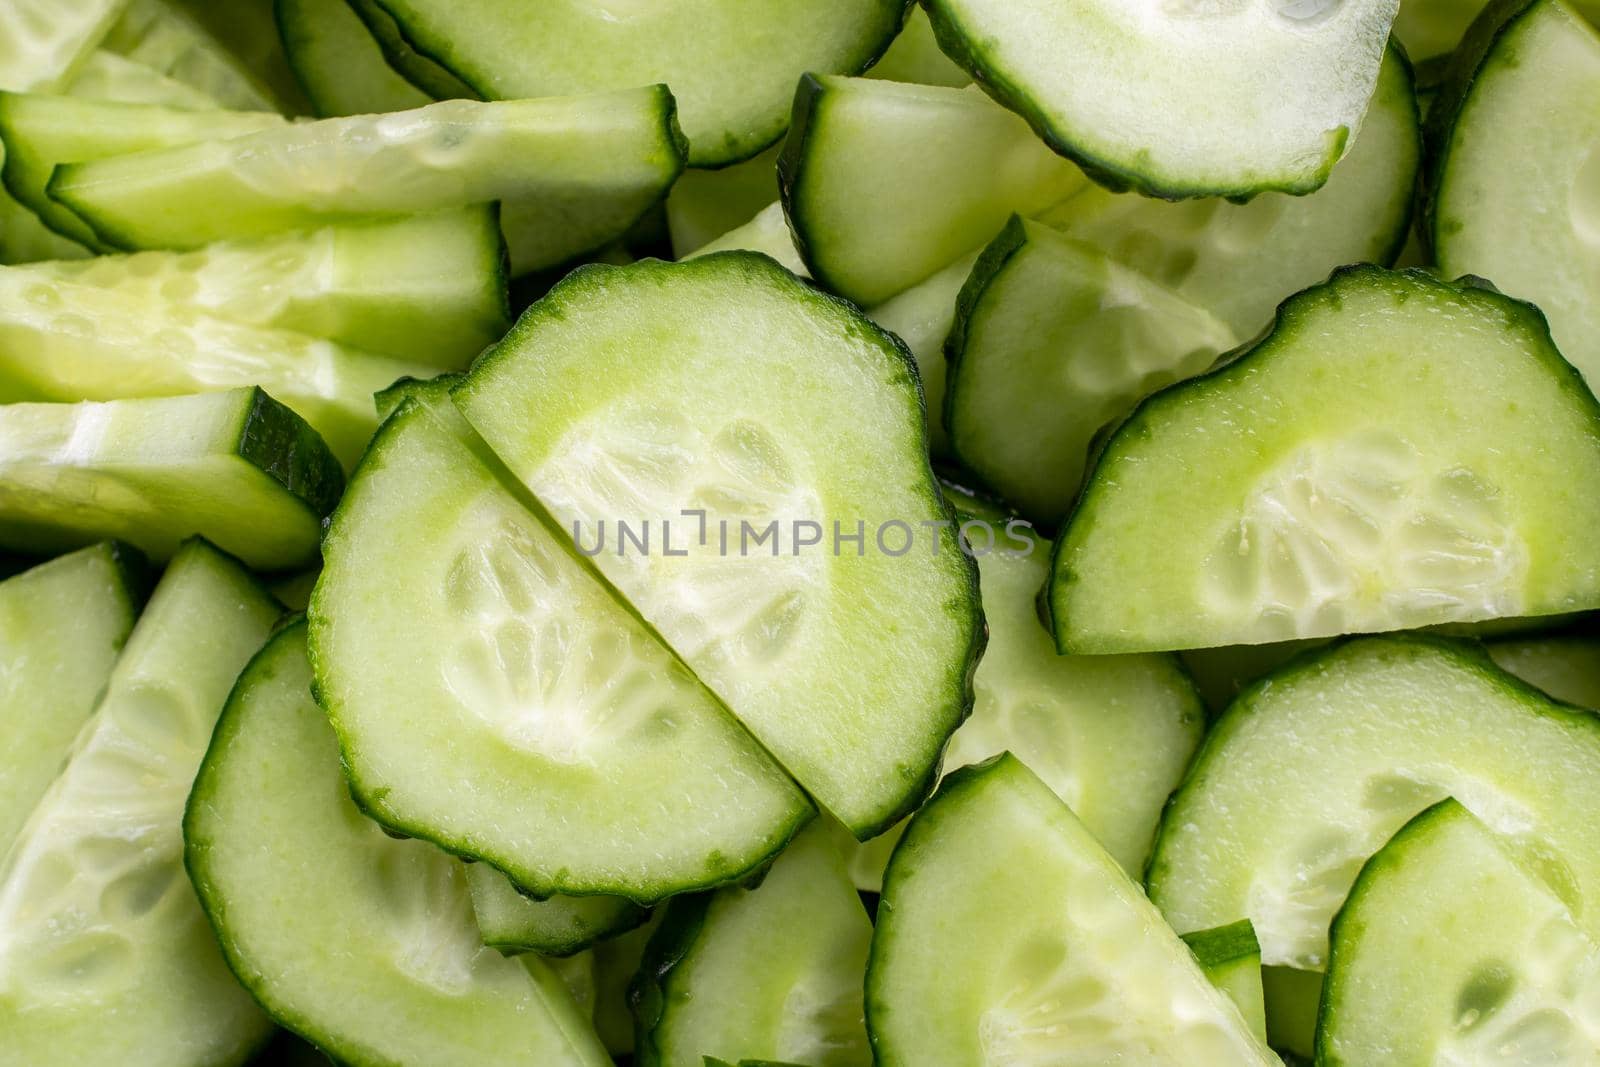 an ingredient for a salad. close-up of cucumber slices, background of sliced cucumber. Macro-type of vegetable. Food background.